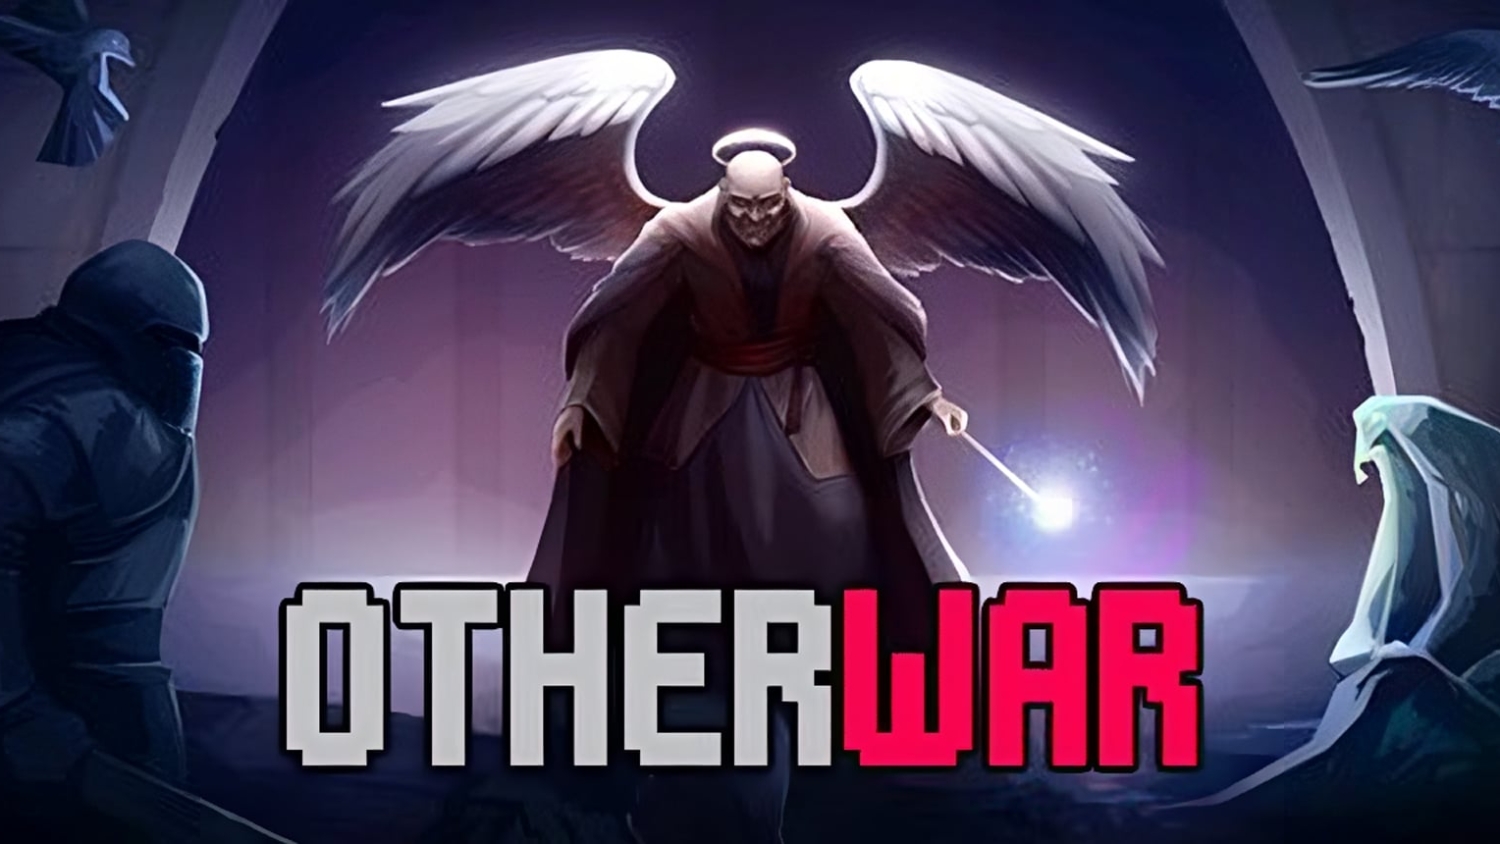 Is Otherwar, Worth Playing?